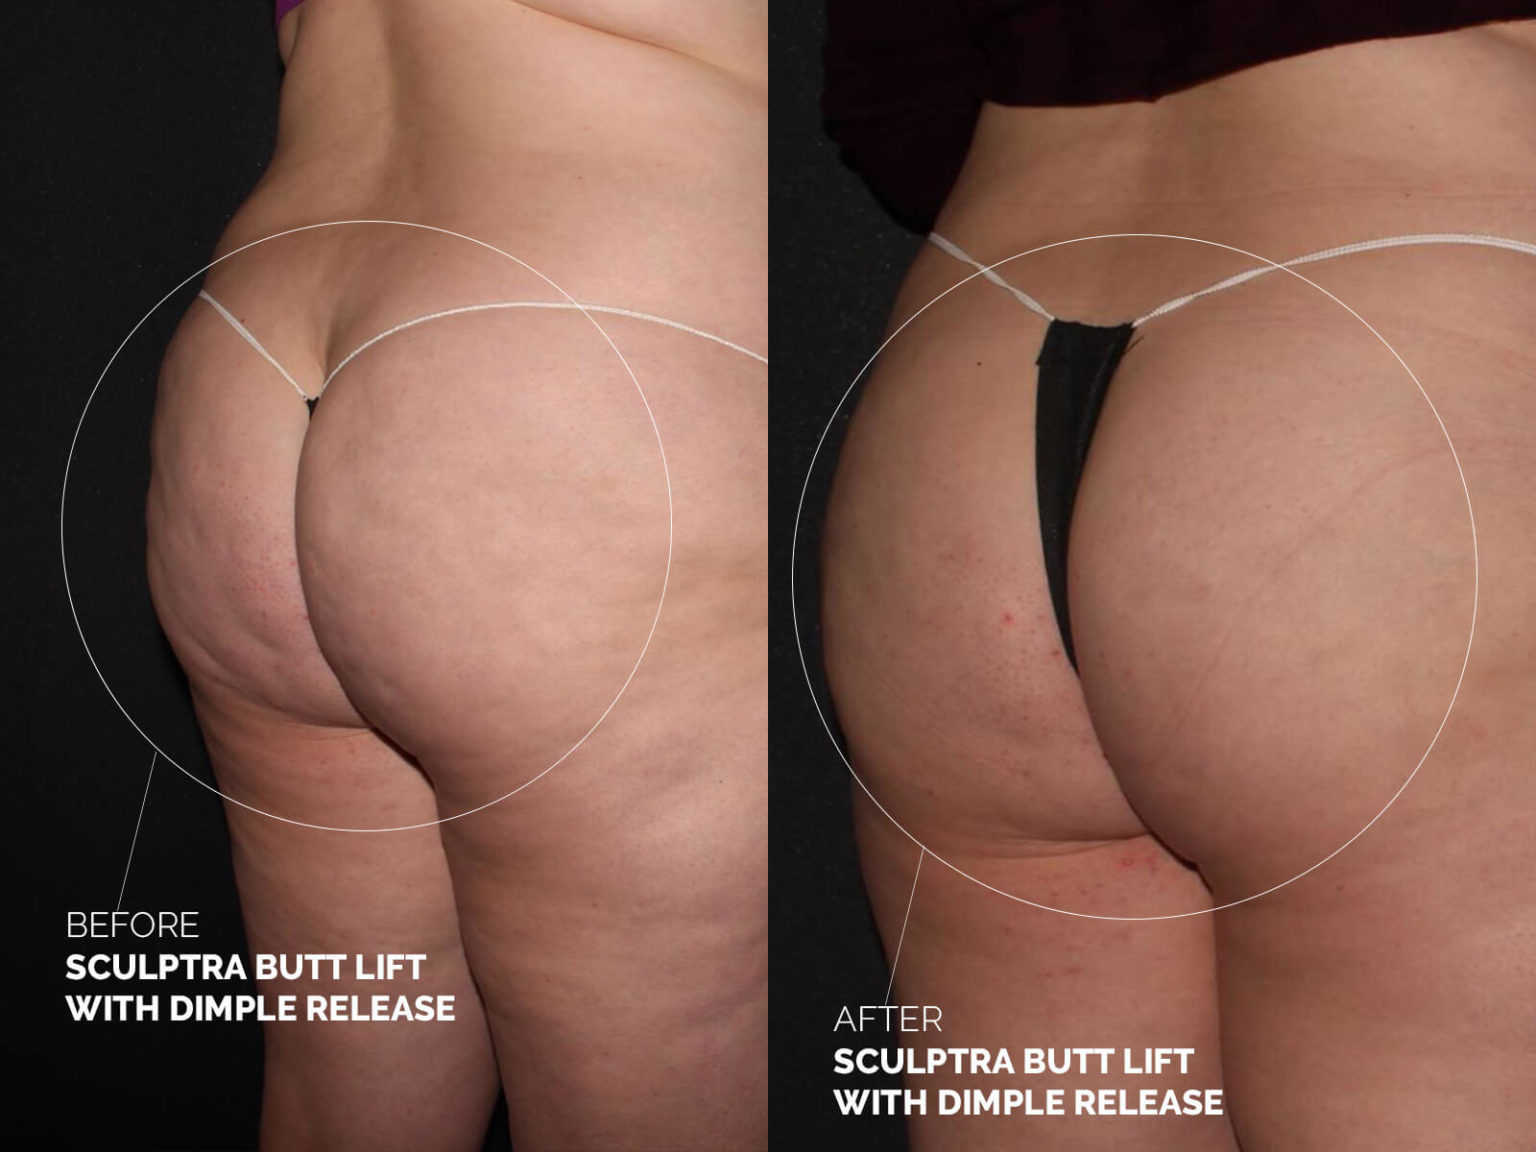 sculptra-butt-lift-dimple-release-before-after